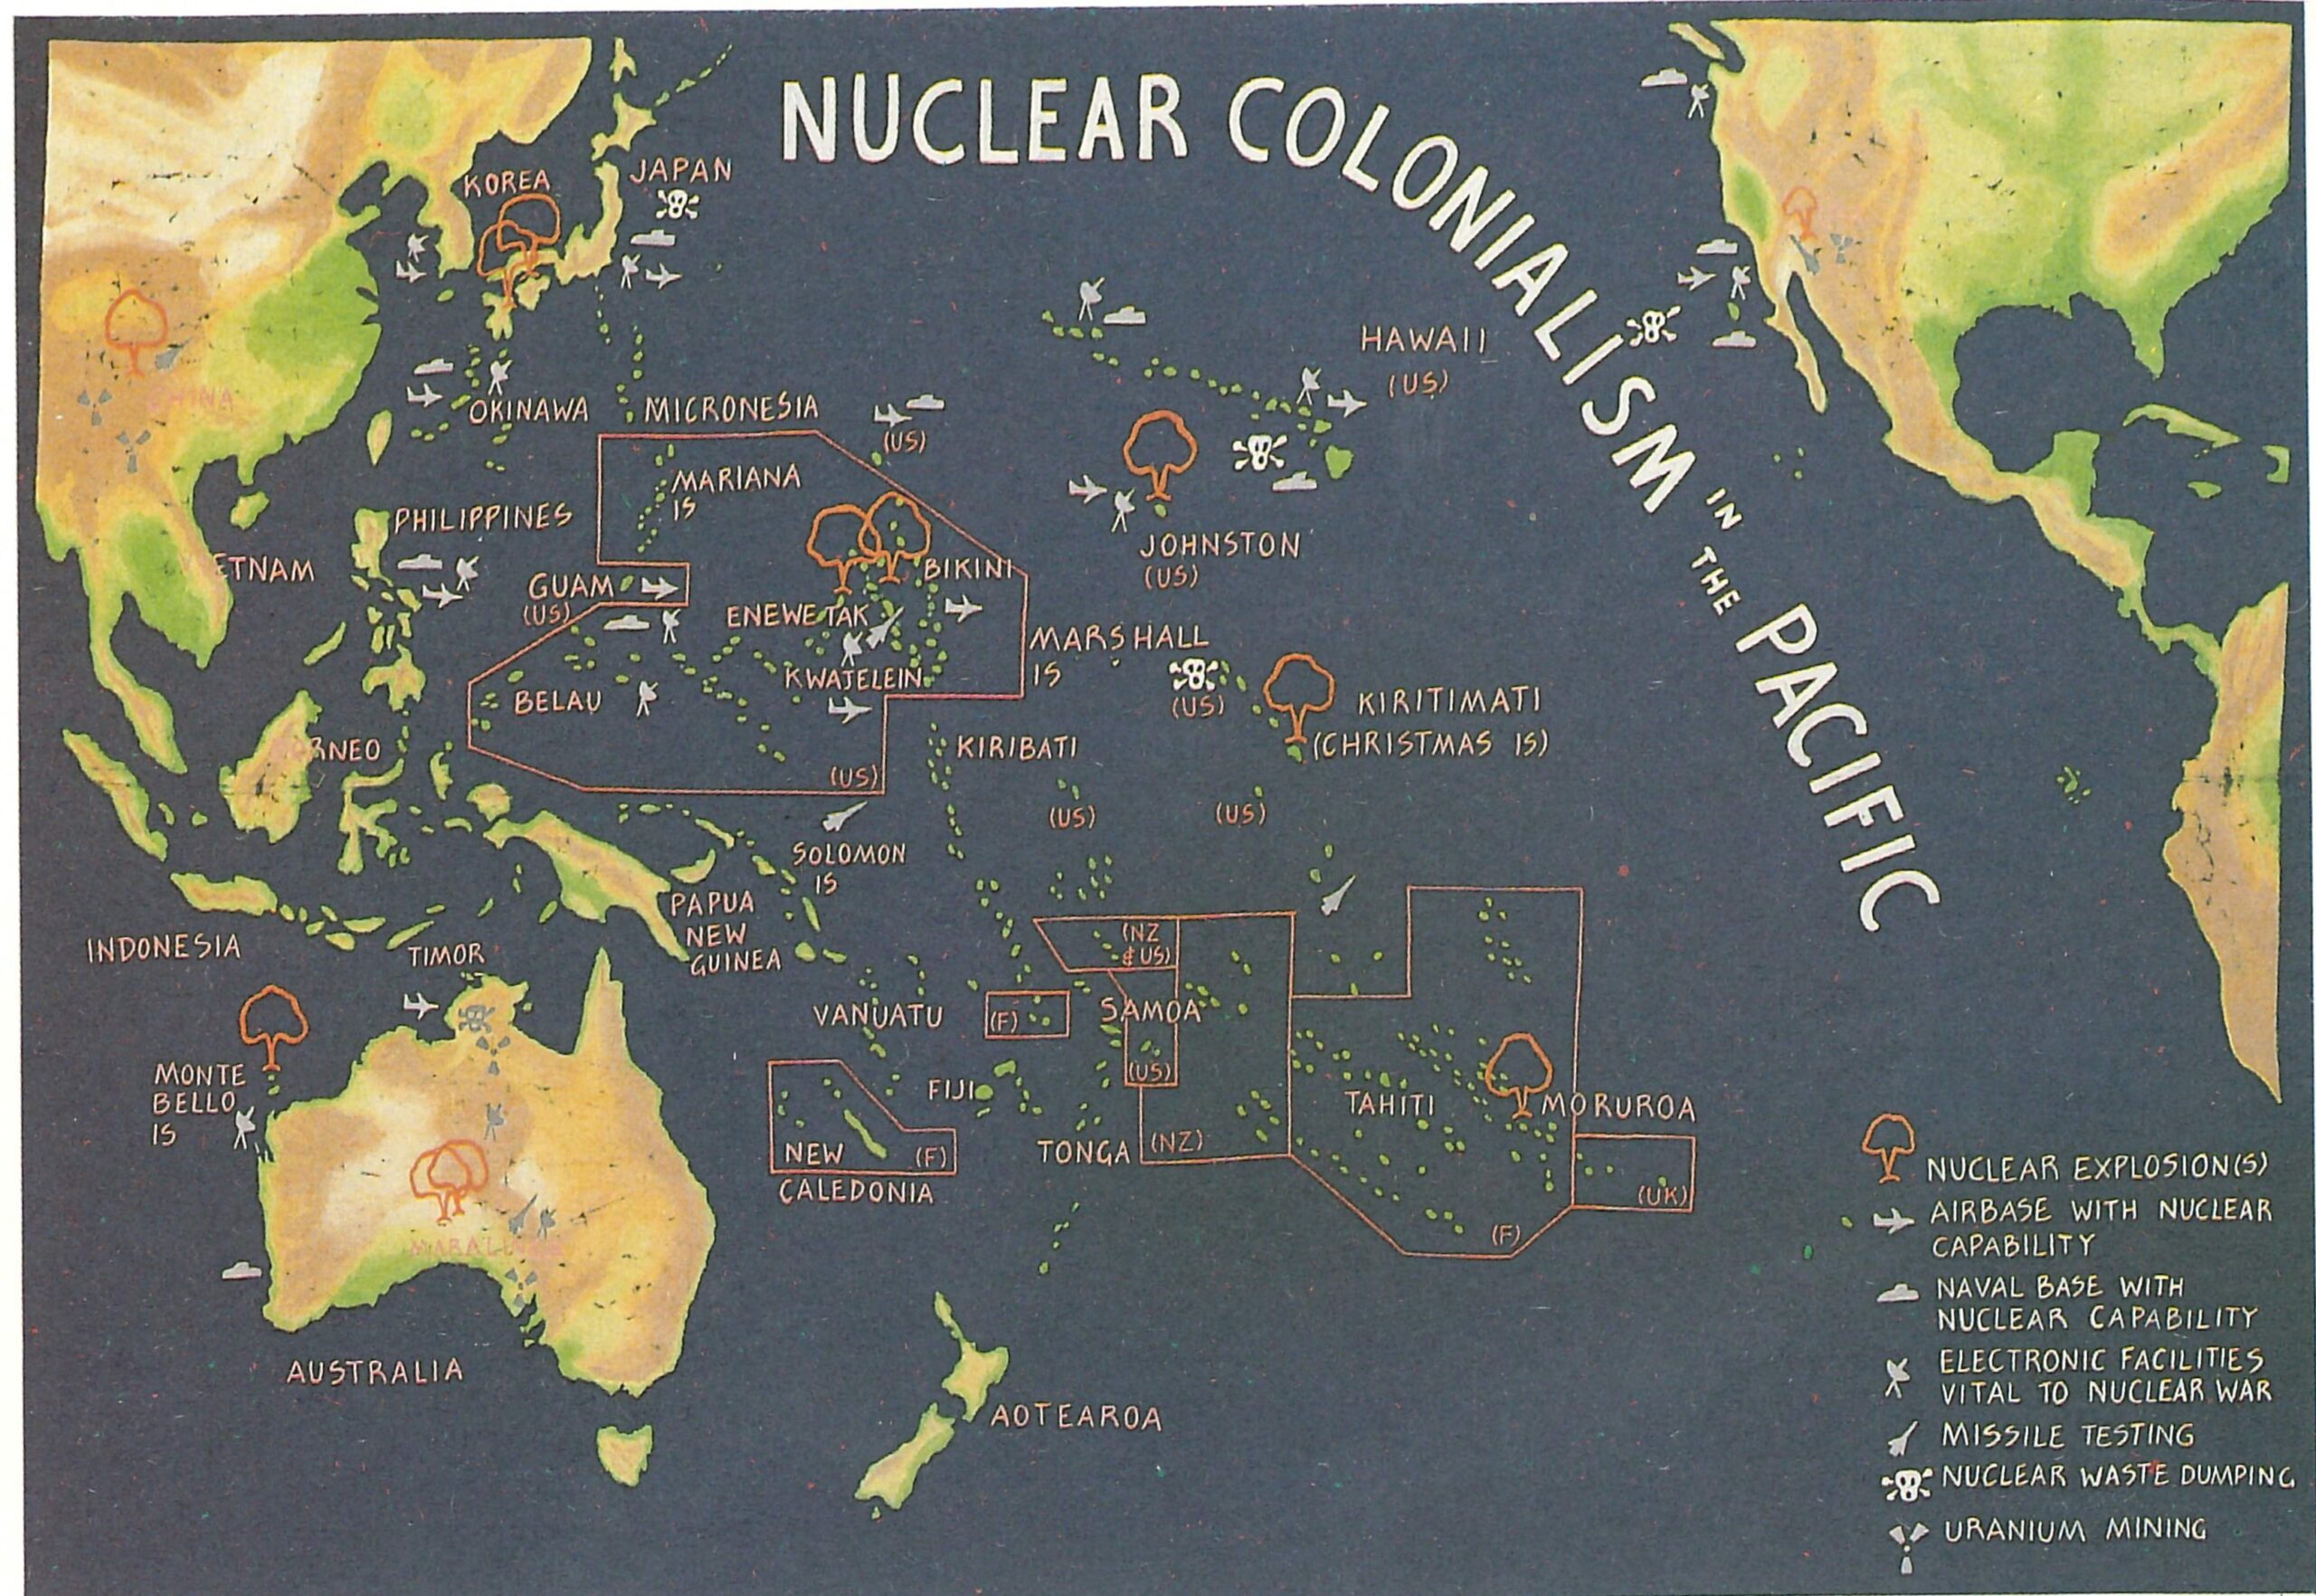 A map shows the pacific ocean with areas marked on and illsutrated with drawings of aeroplanes, clouds and red lines.